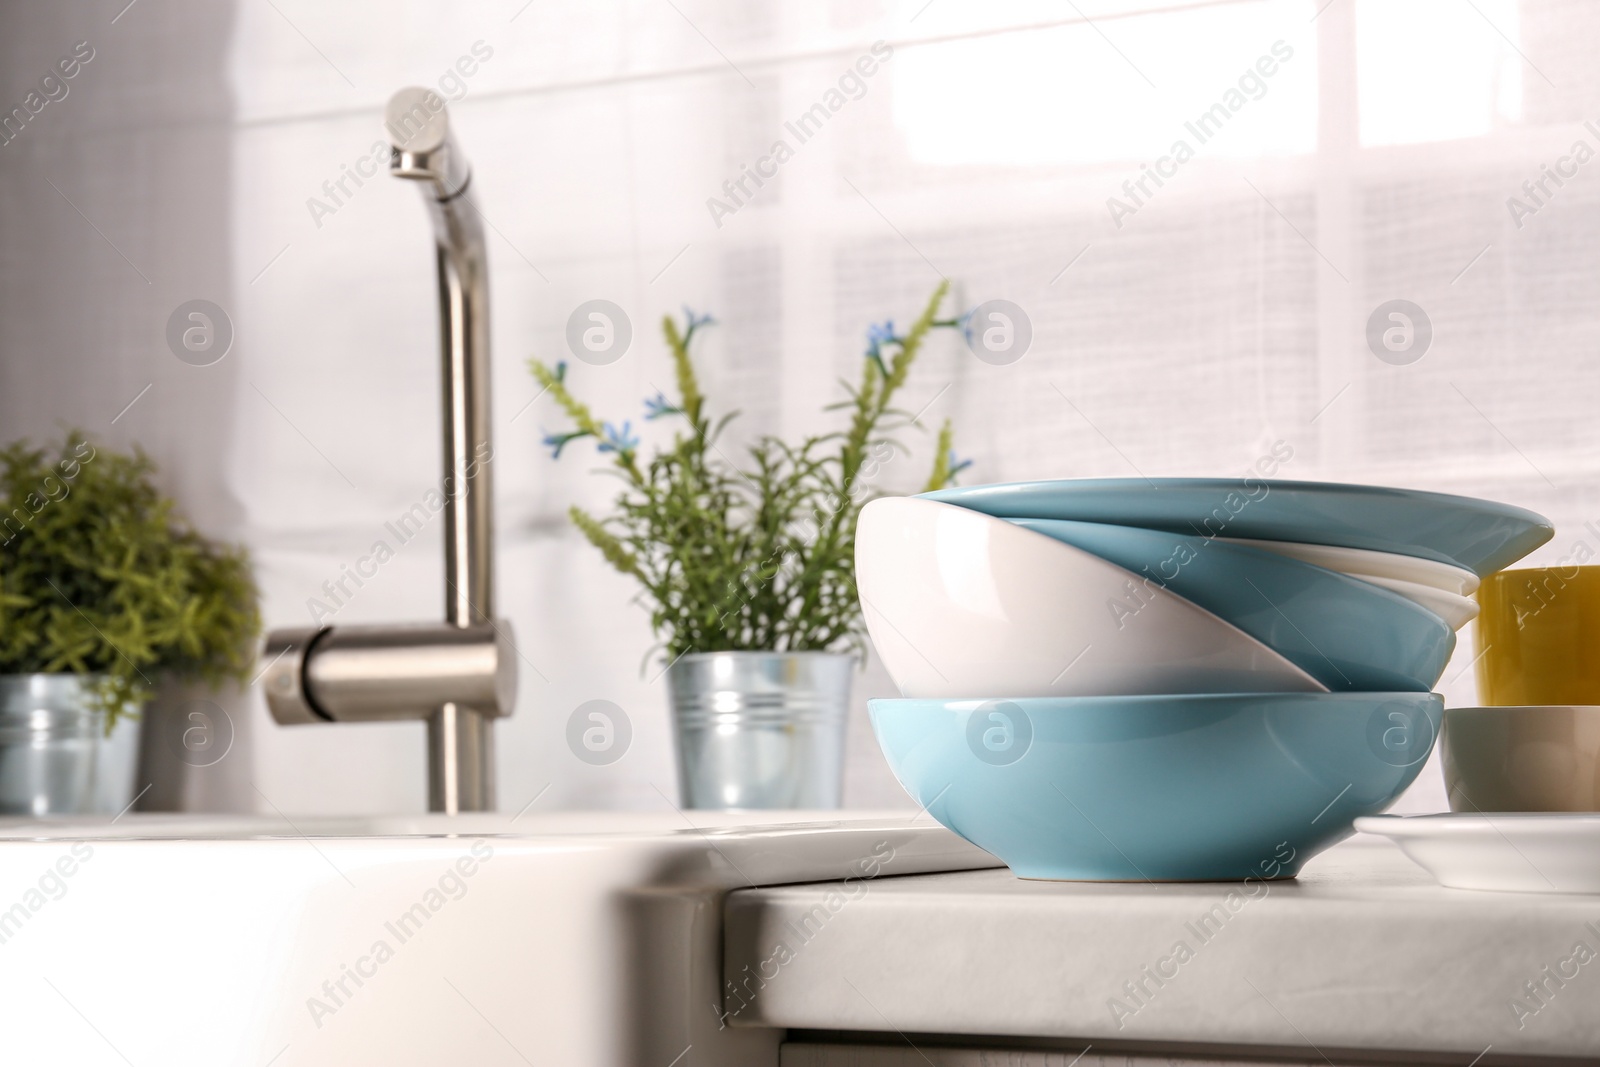 Photo of Clean tableware on light countertop in kitchen, space for text